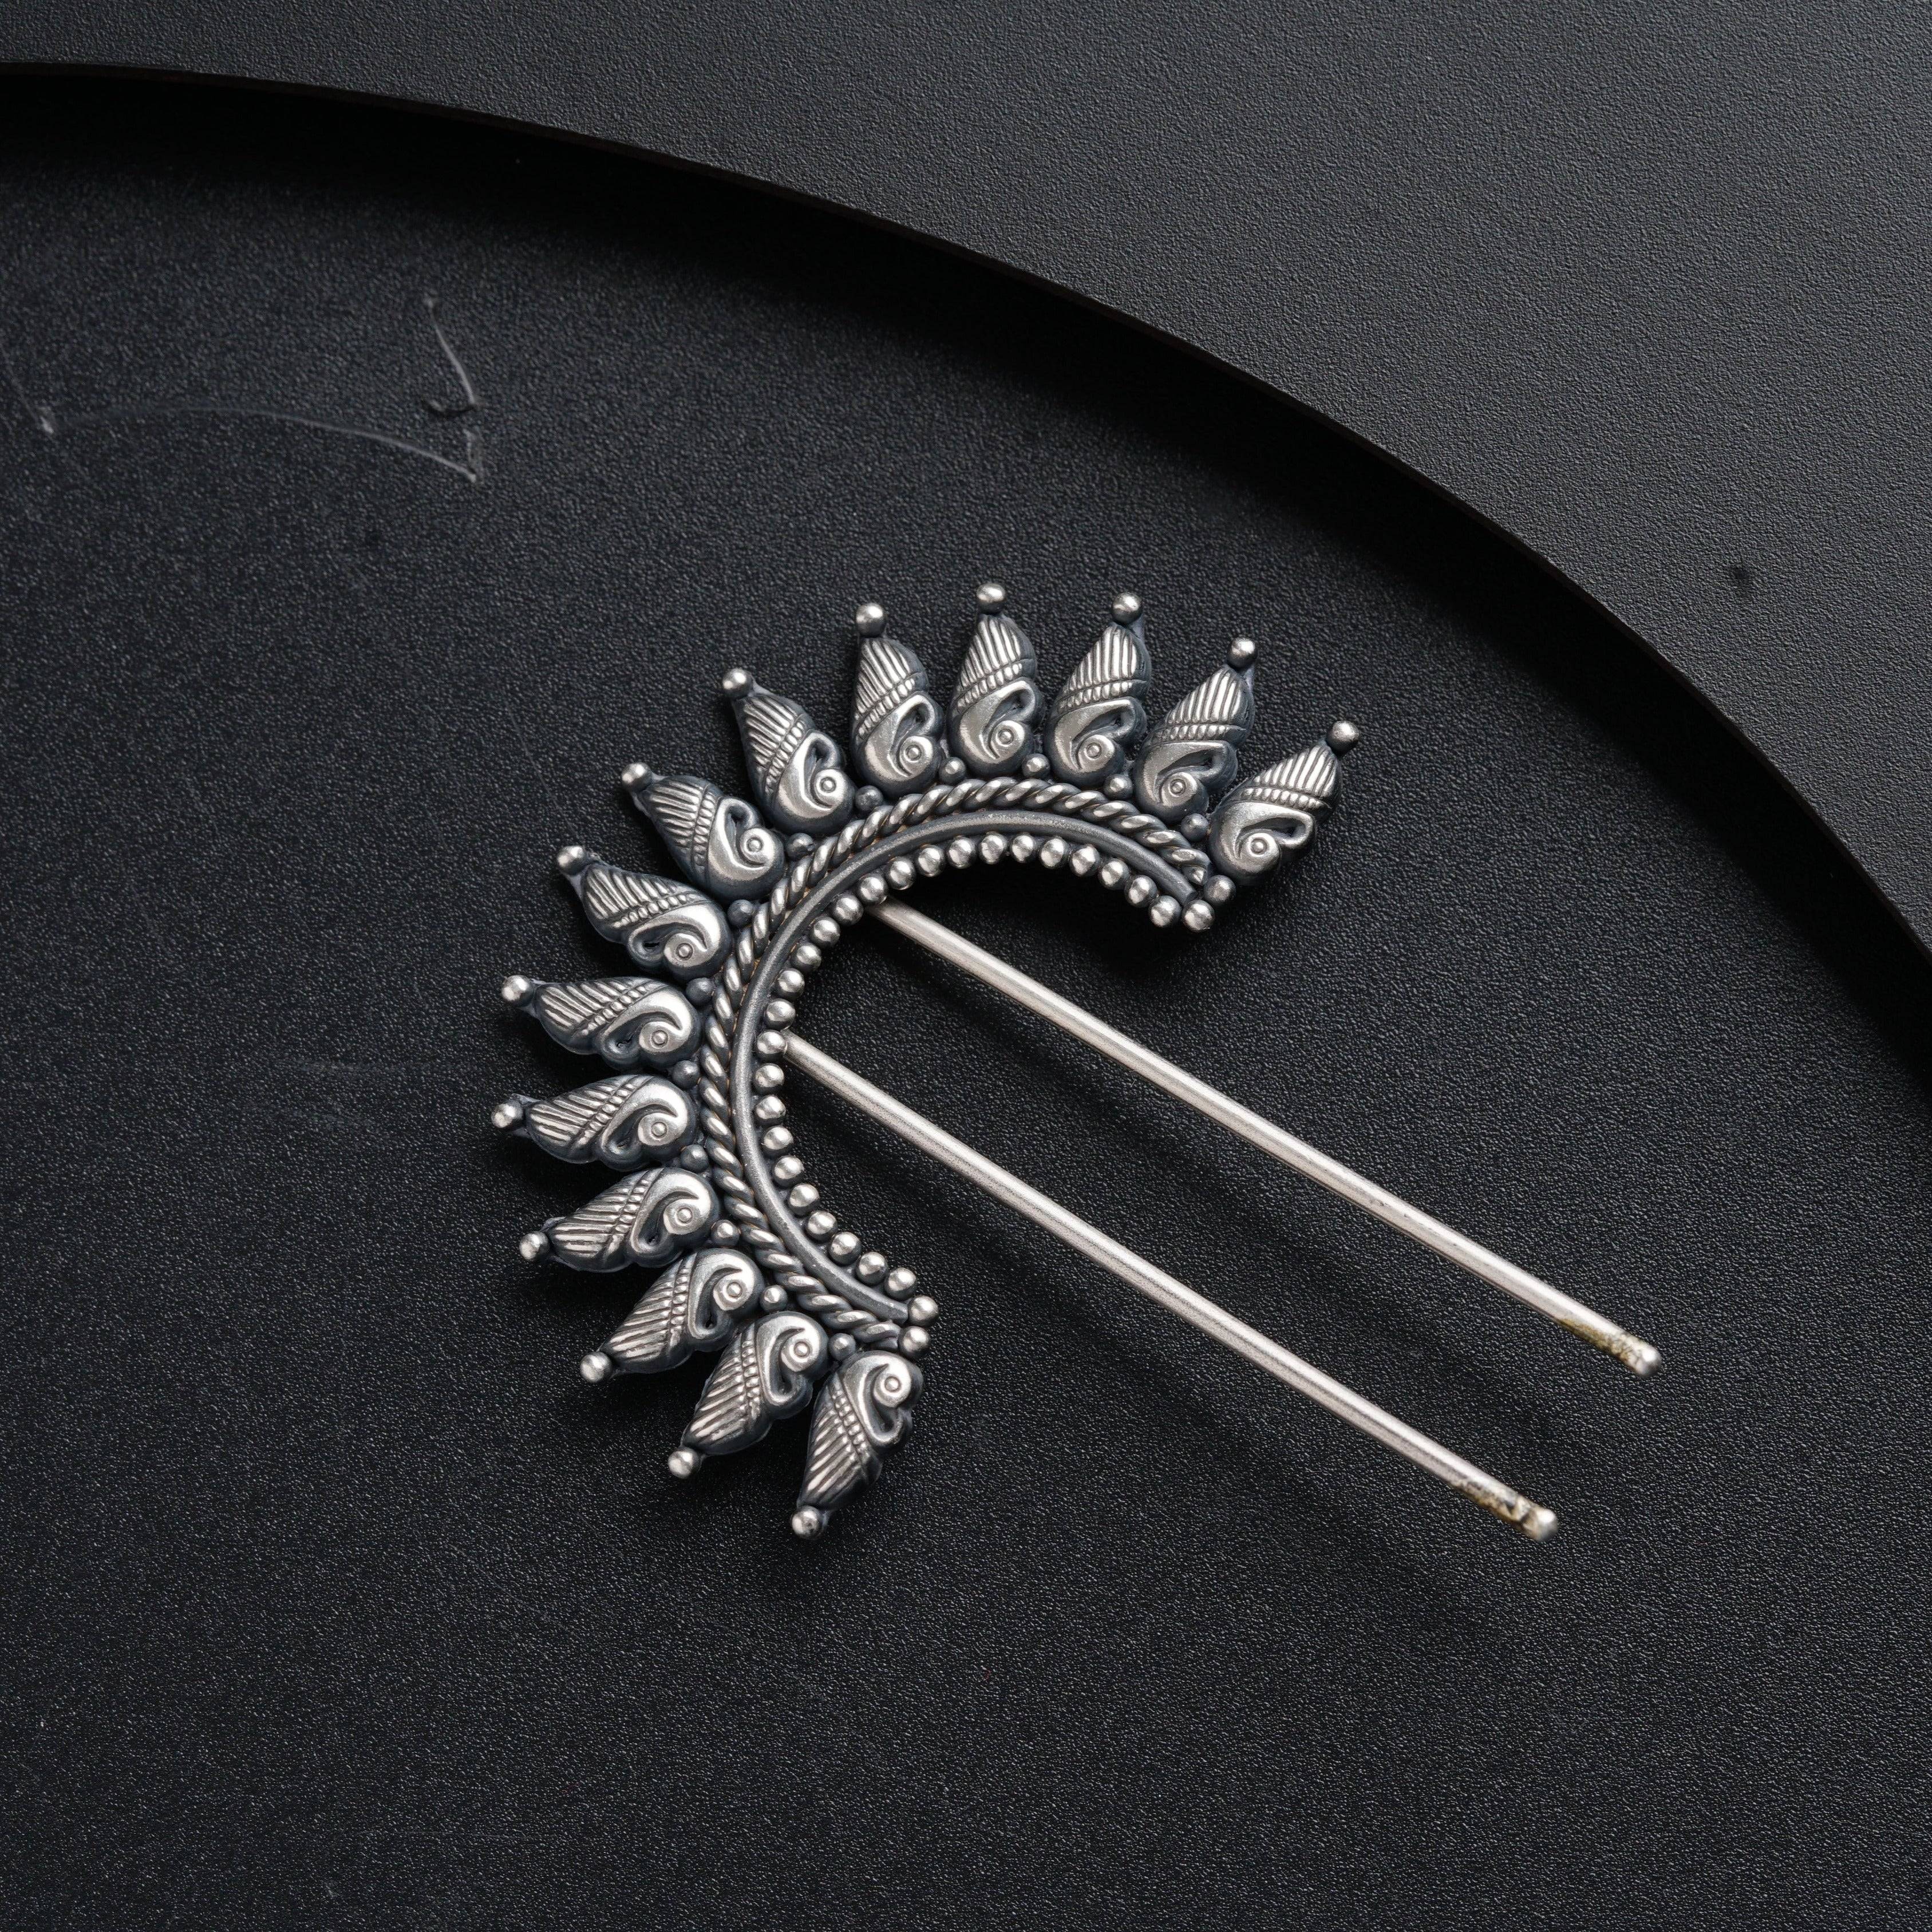 a pair of hair pins sitting on top of a black surface